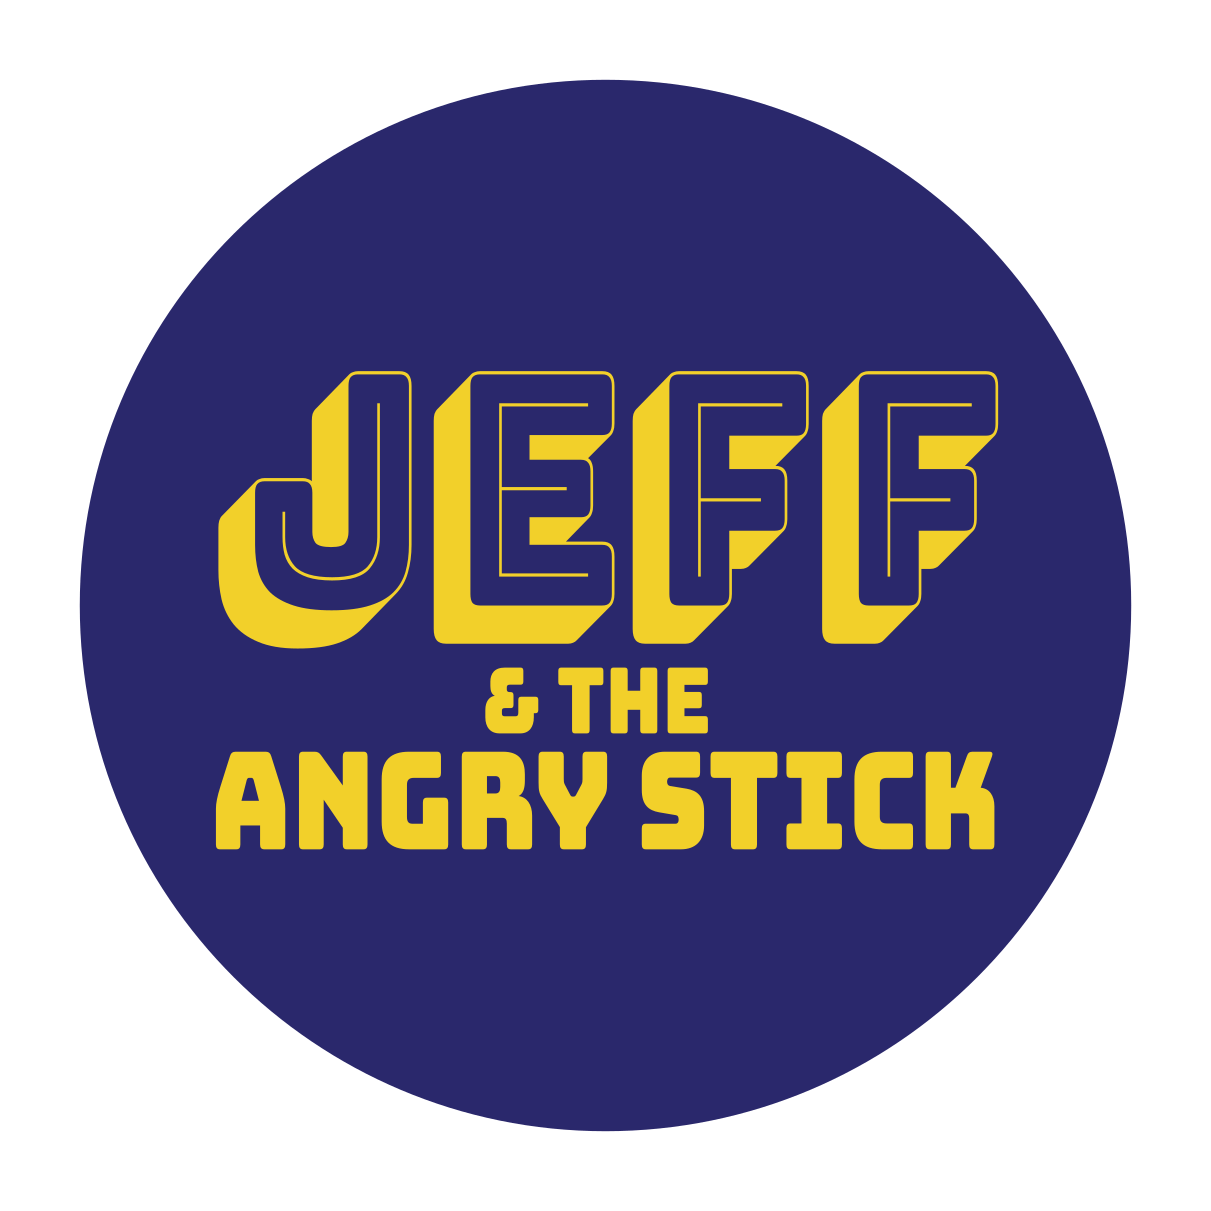 Jeff & The Angry Stick